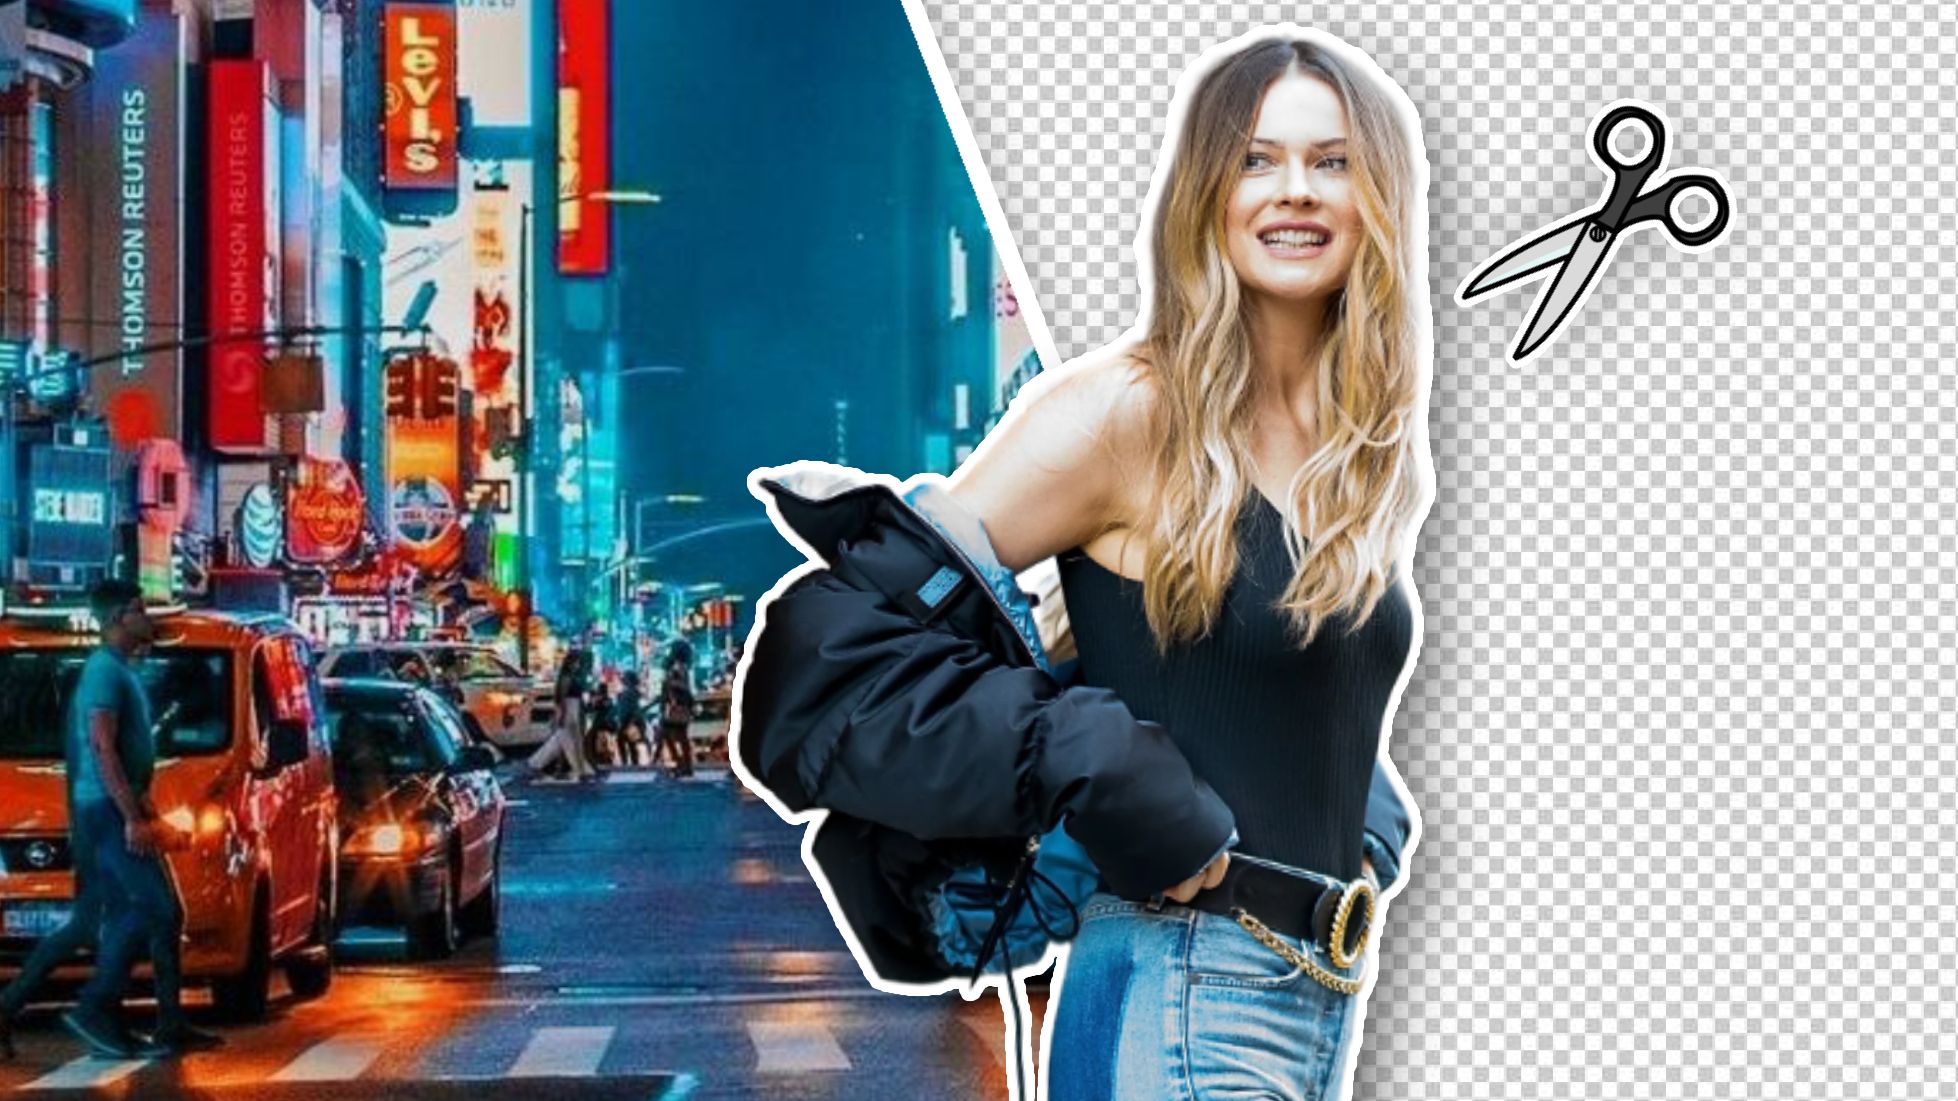 6 Best Tools to Remove Background from Image Online